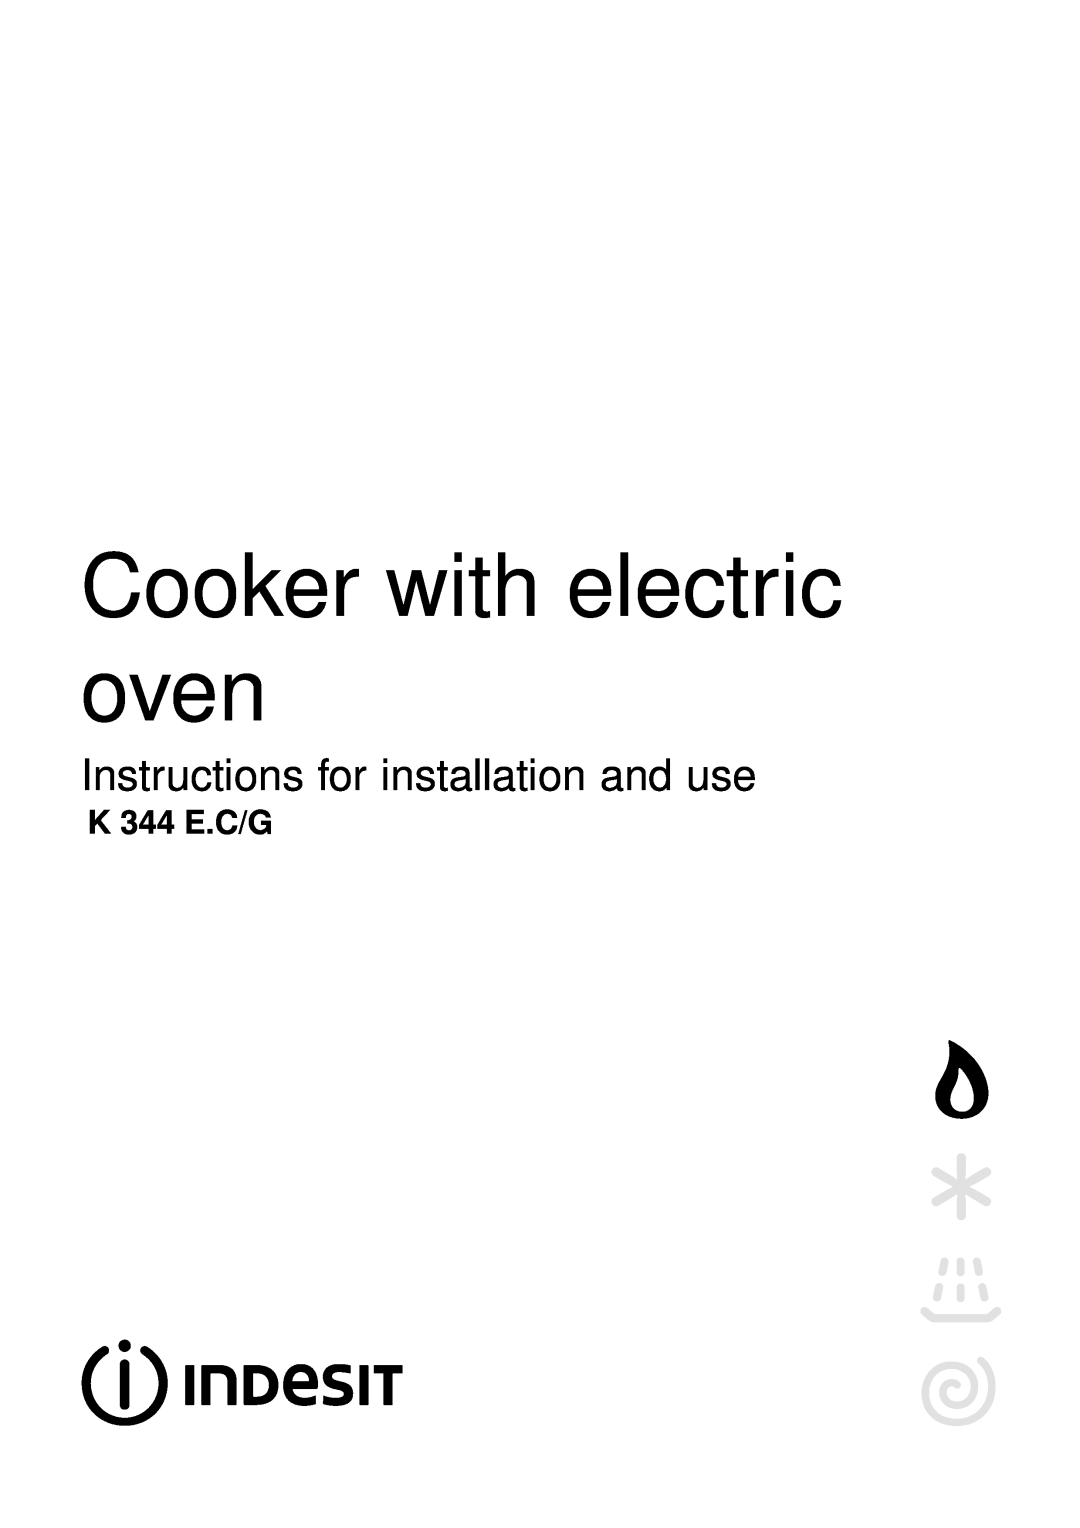 Indesit K 344 E.C/G manual Cooker with electric oven, Instructions for installation and use 